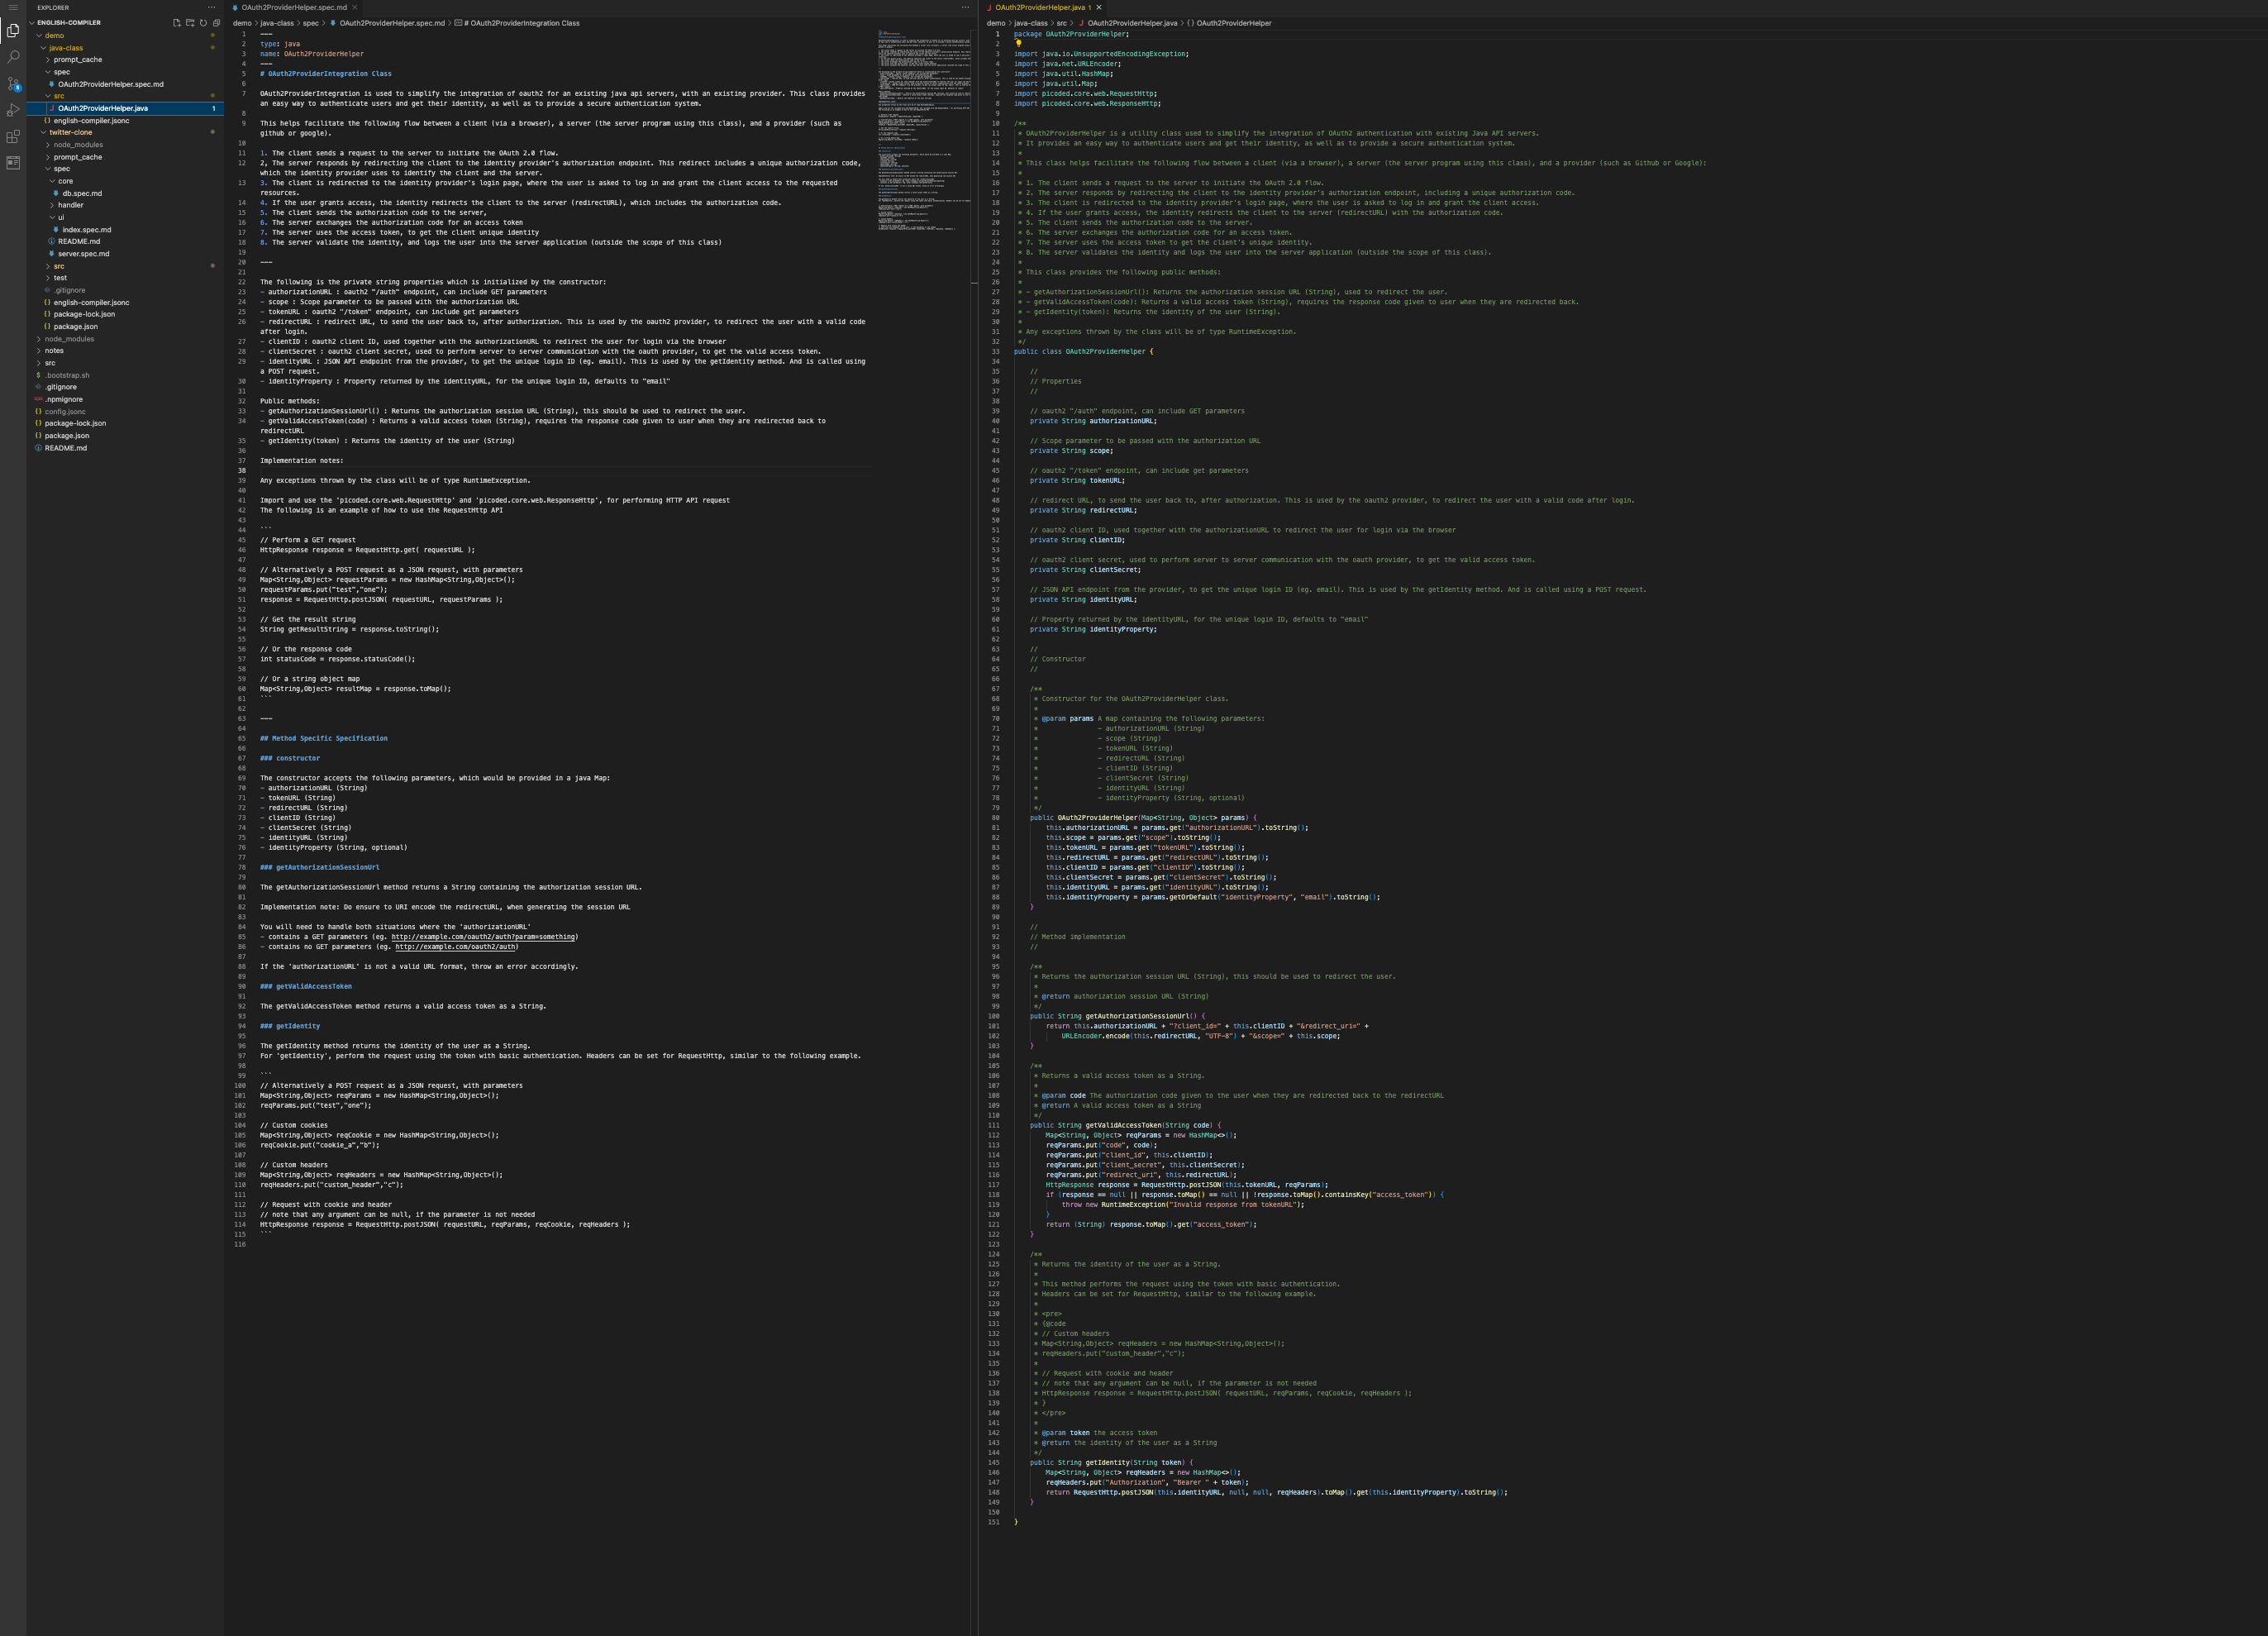 Screenshot of a large wall of text and code, to represent how large the oauth2 spec is